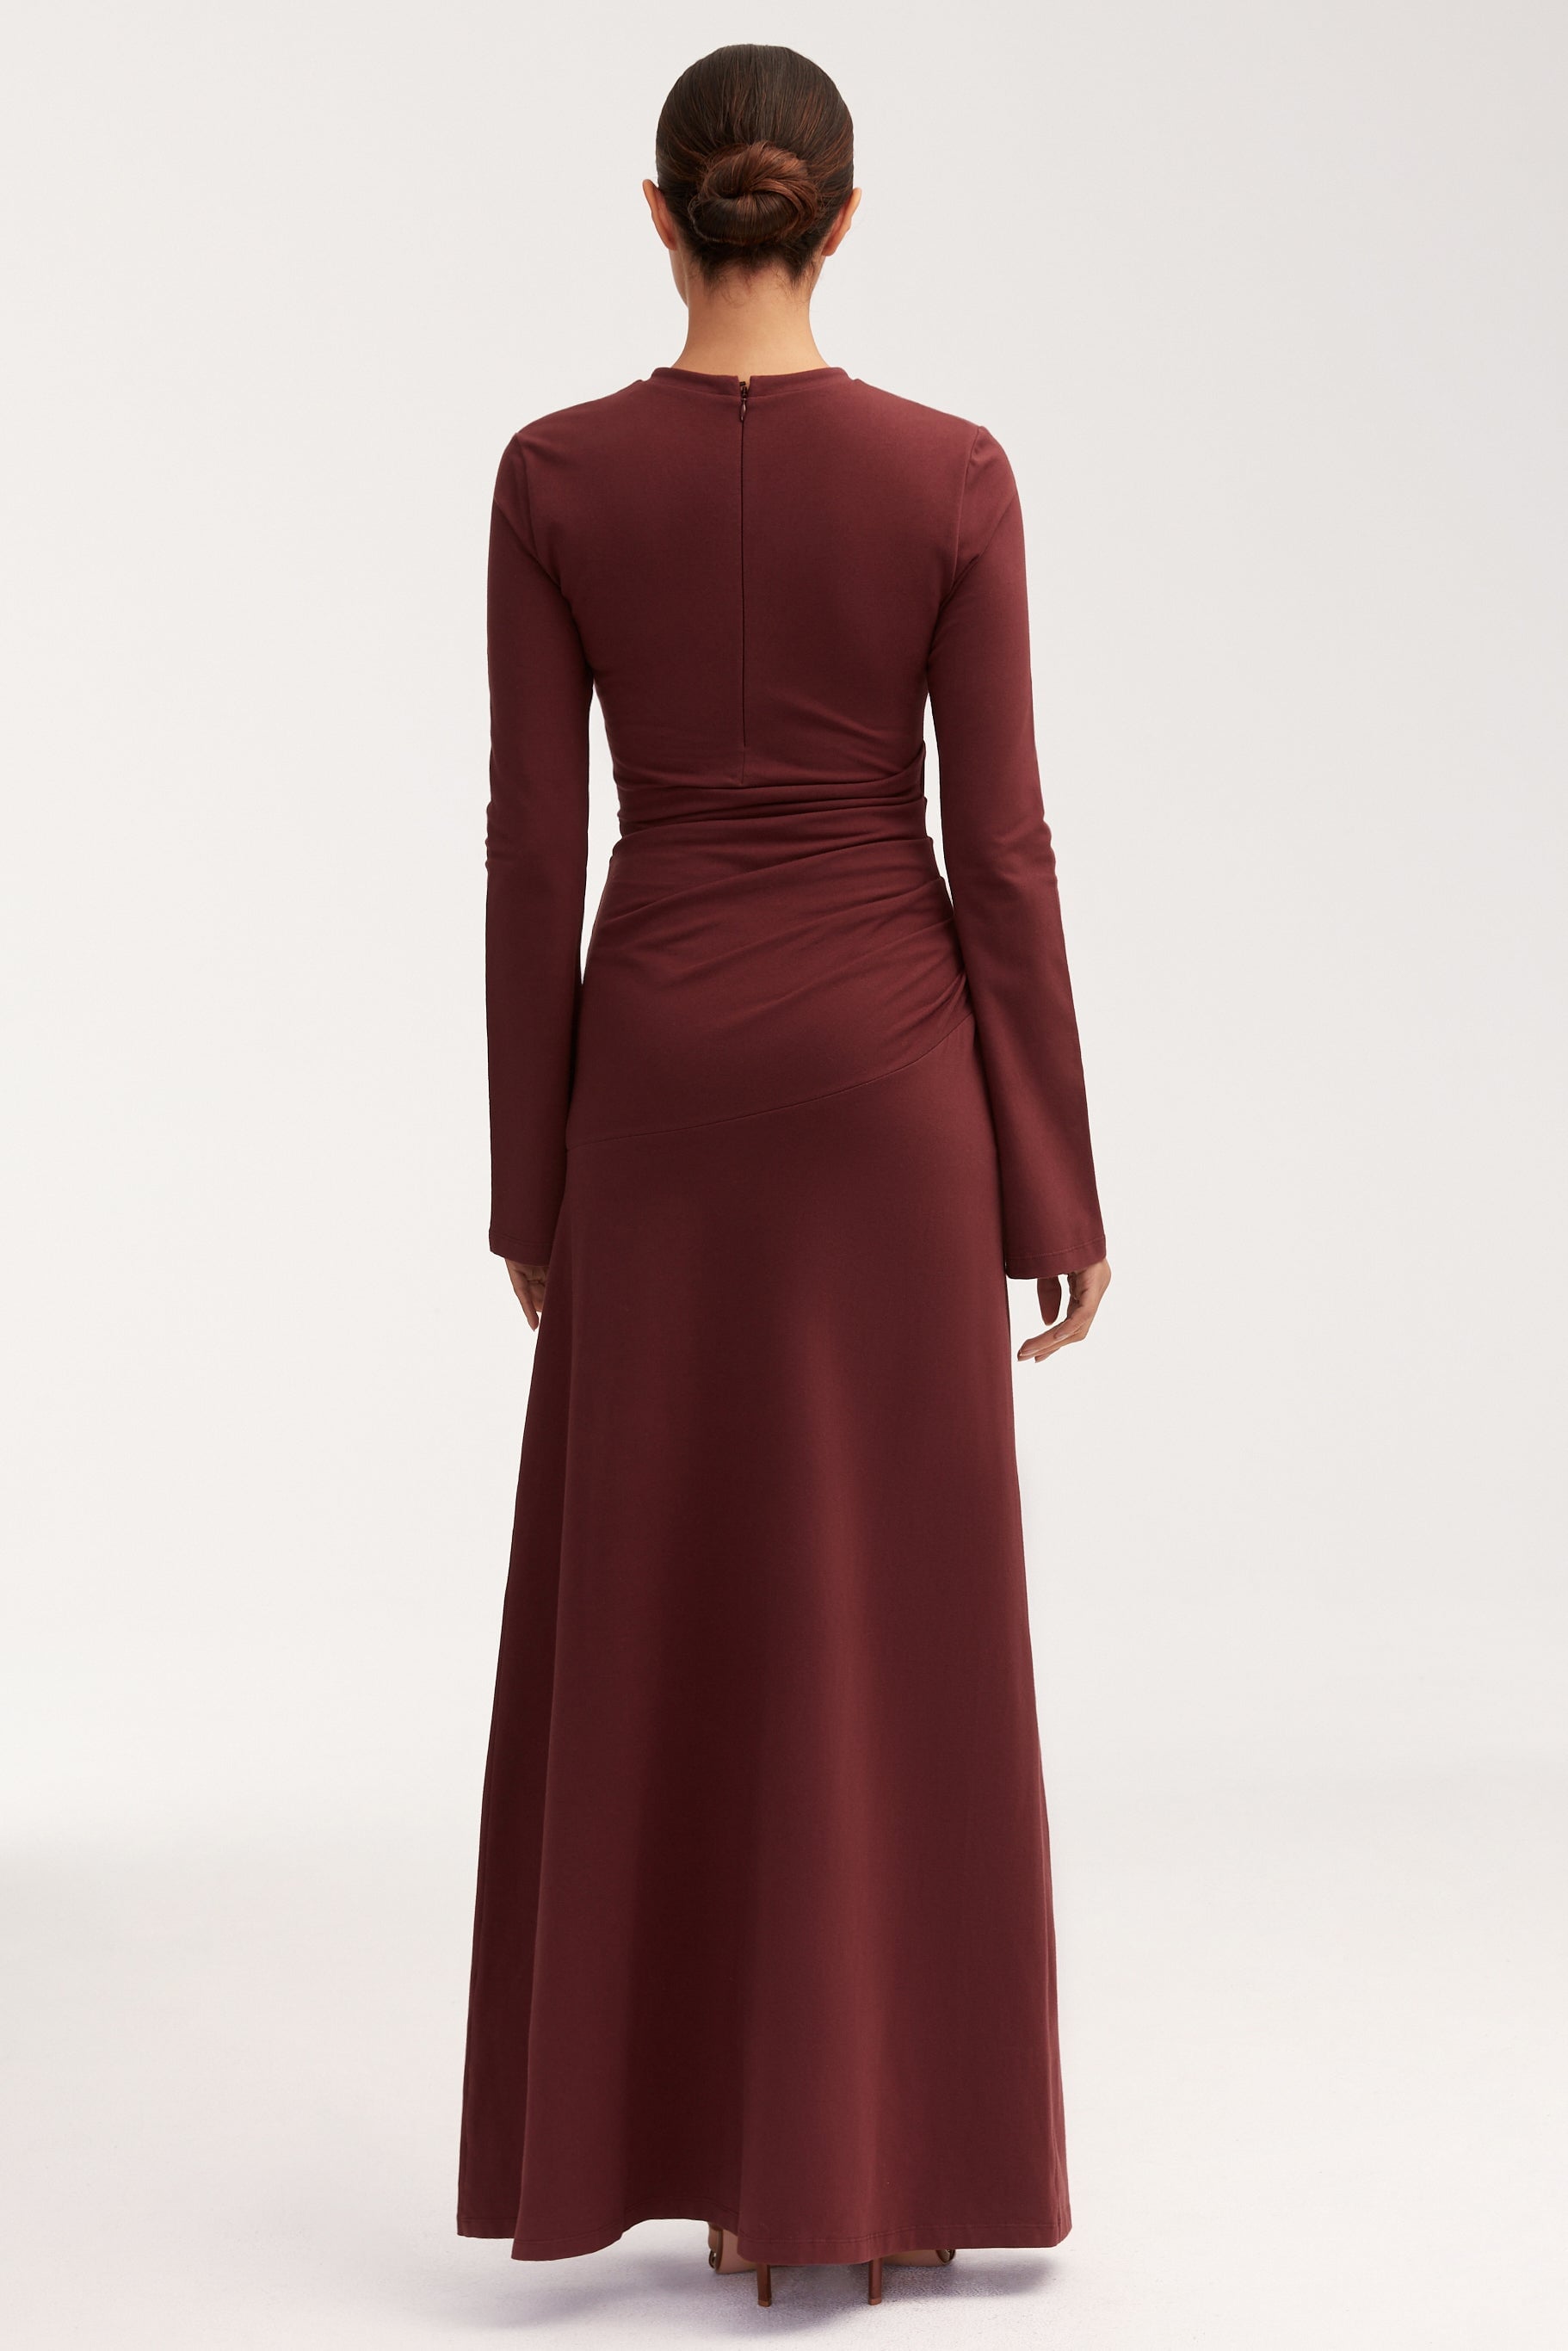 Natalie Rouched Jersey Maxi Dress - Port Royale Dresses Veiled 